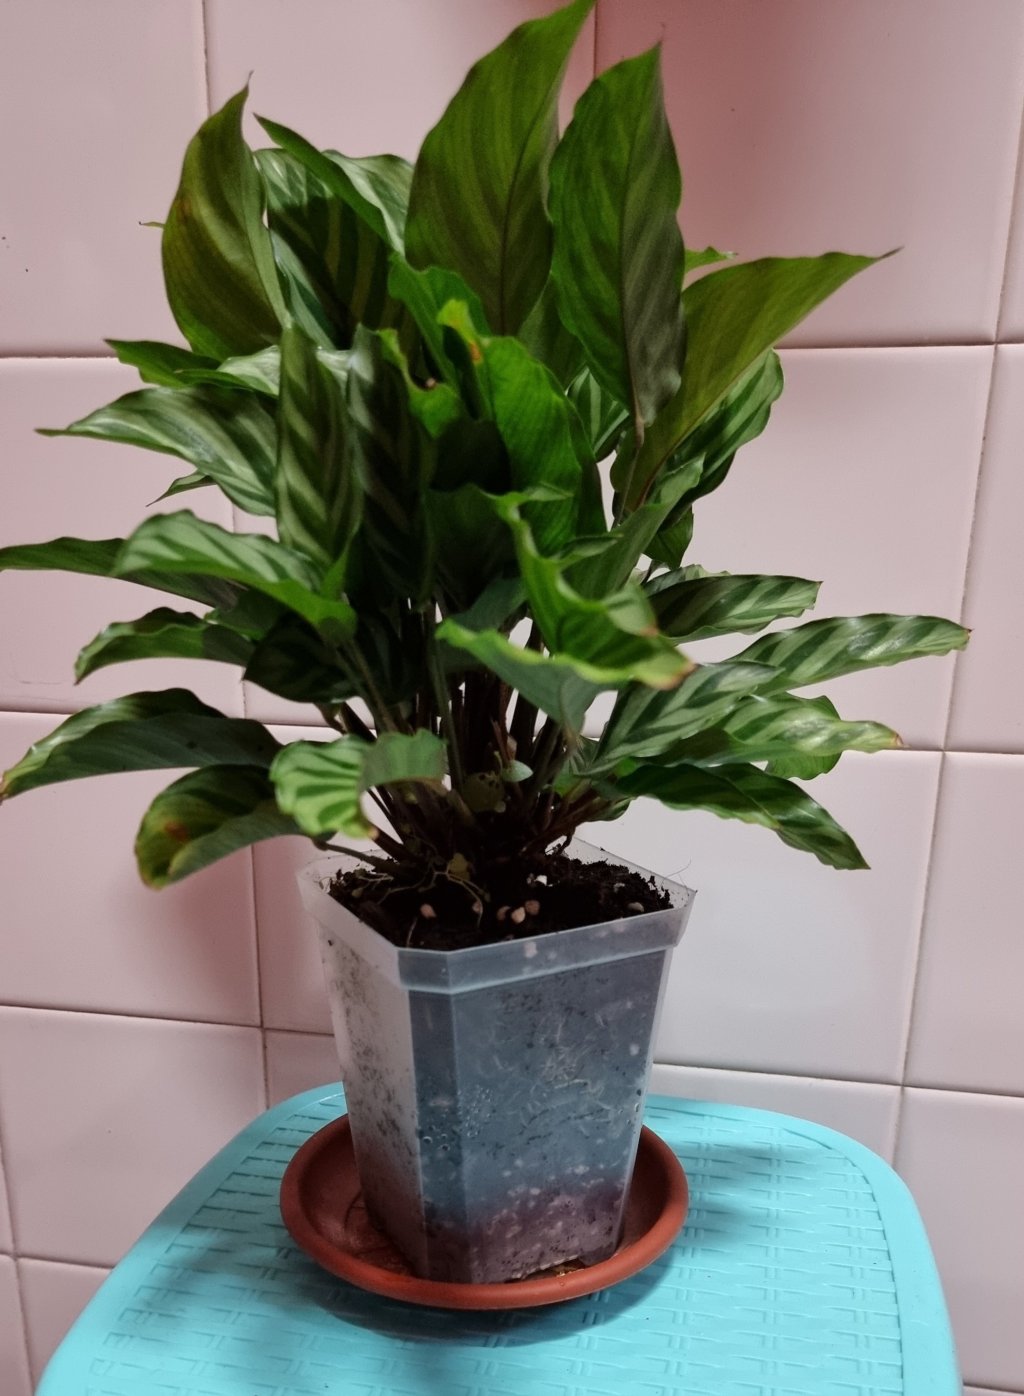 A Calathea plant for Mother’s Day